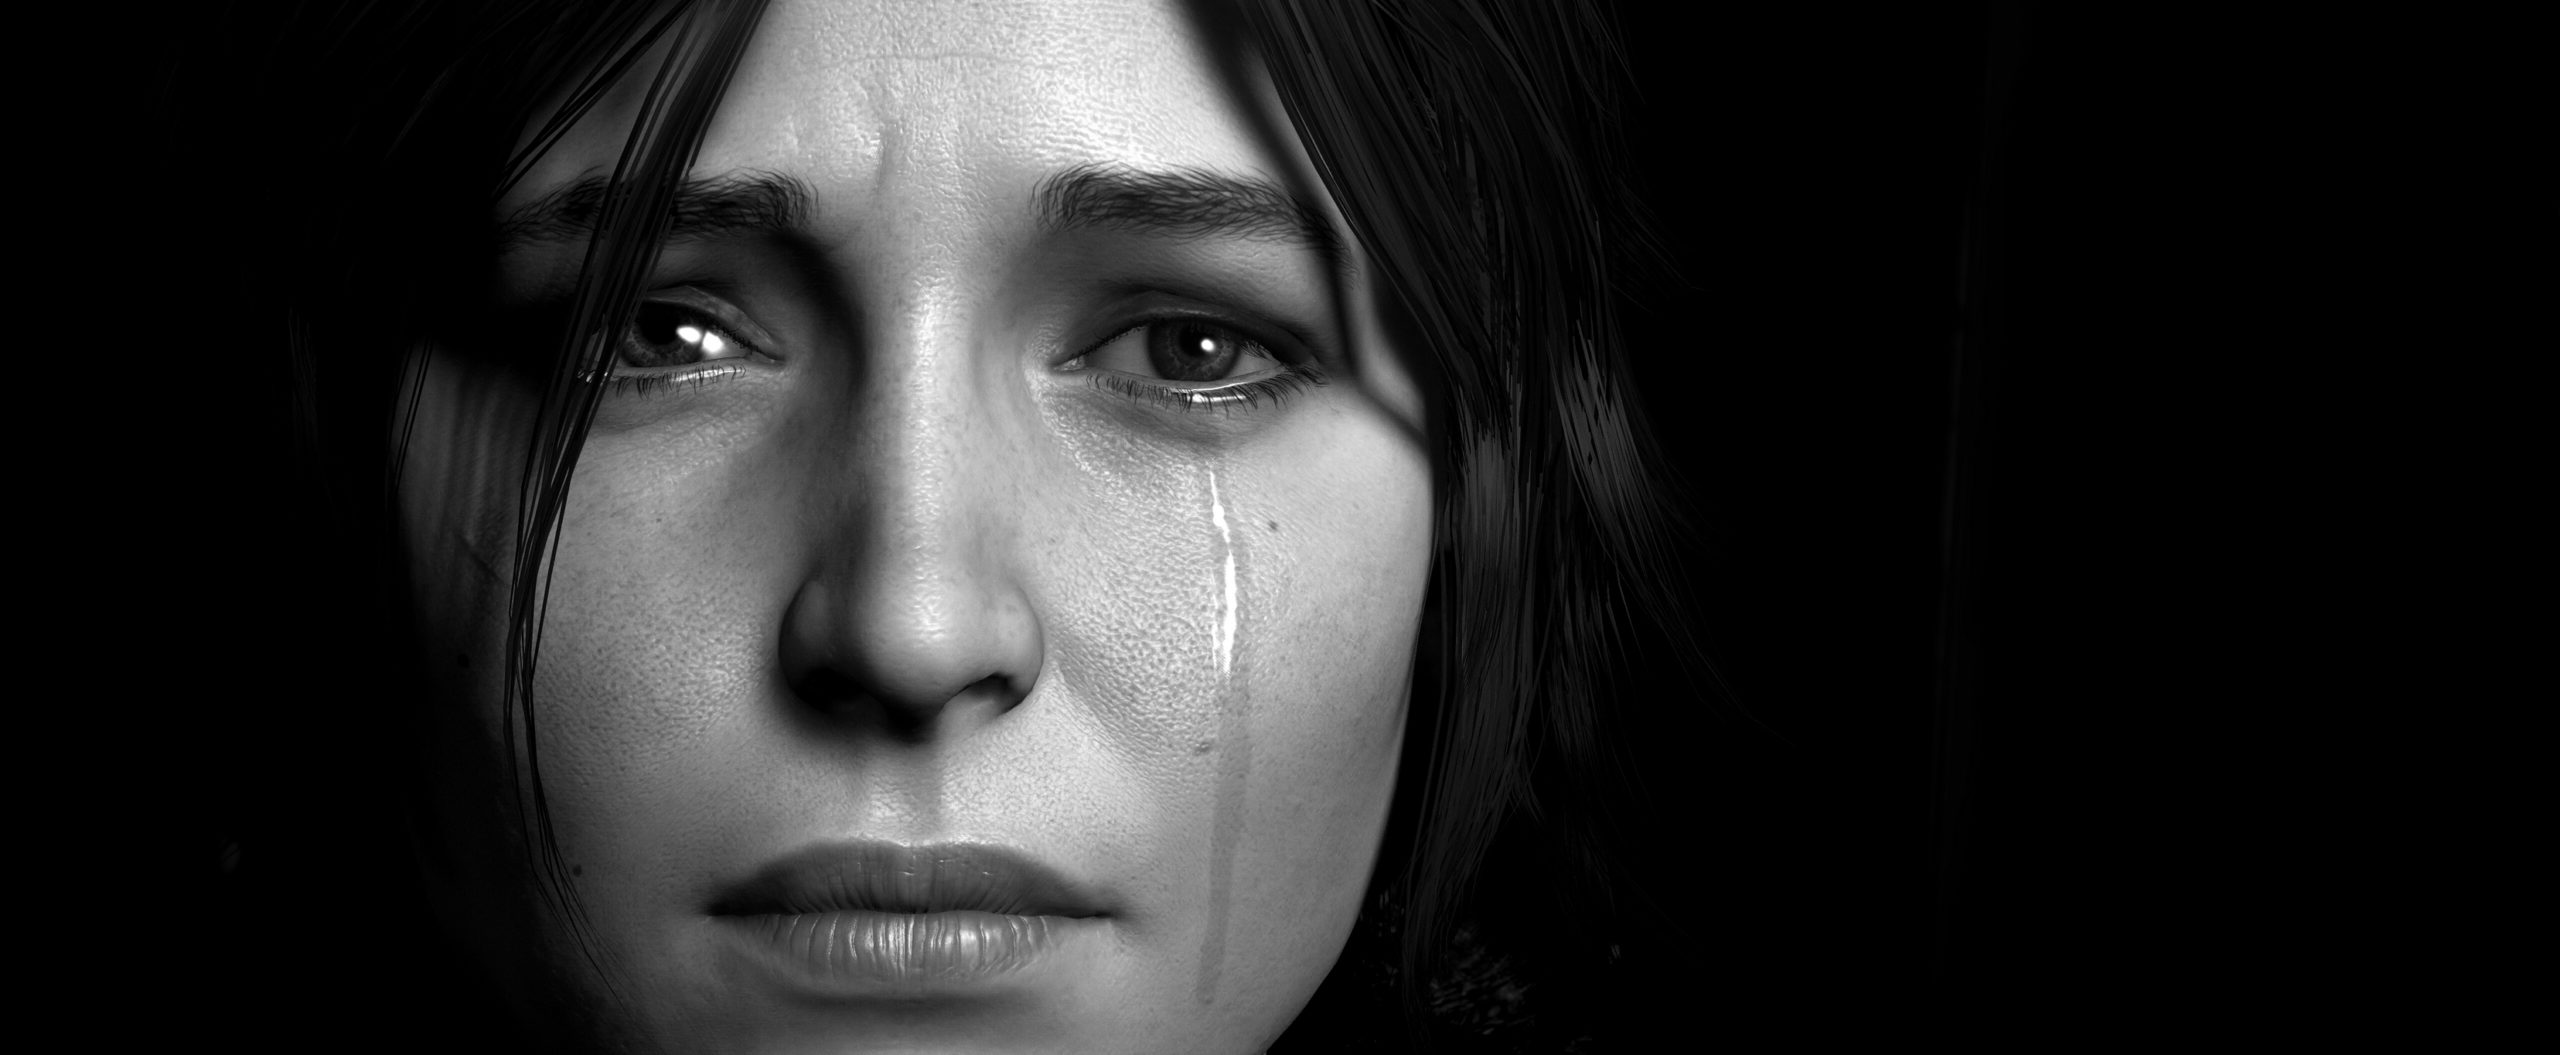 Video Game Portraits Are Beautiful Works Of Art